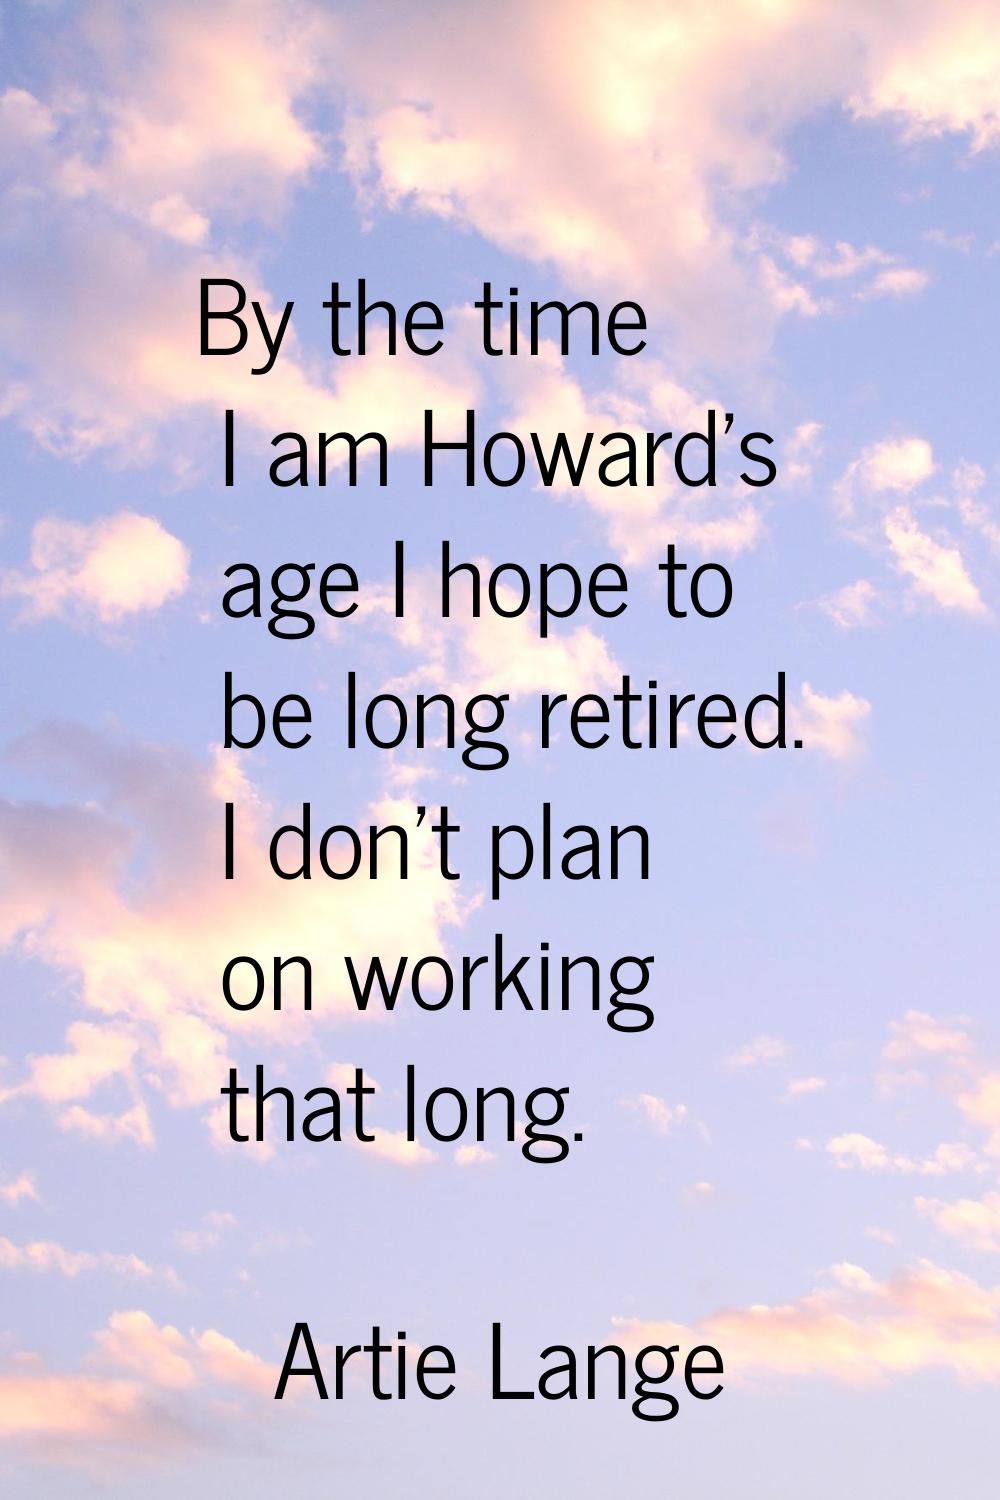 By the time I am Howard's age I hope to be long retired. I don't plan on working that long.